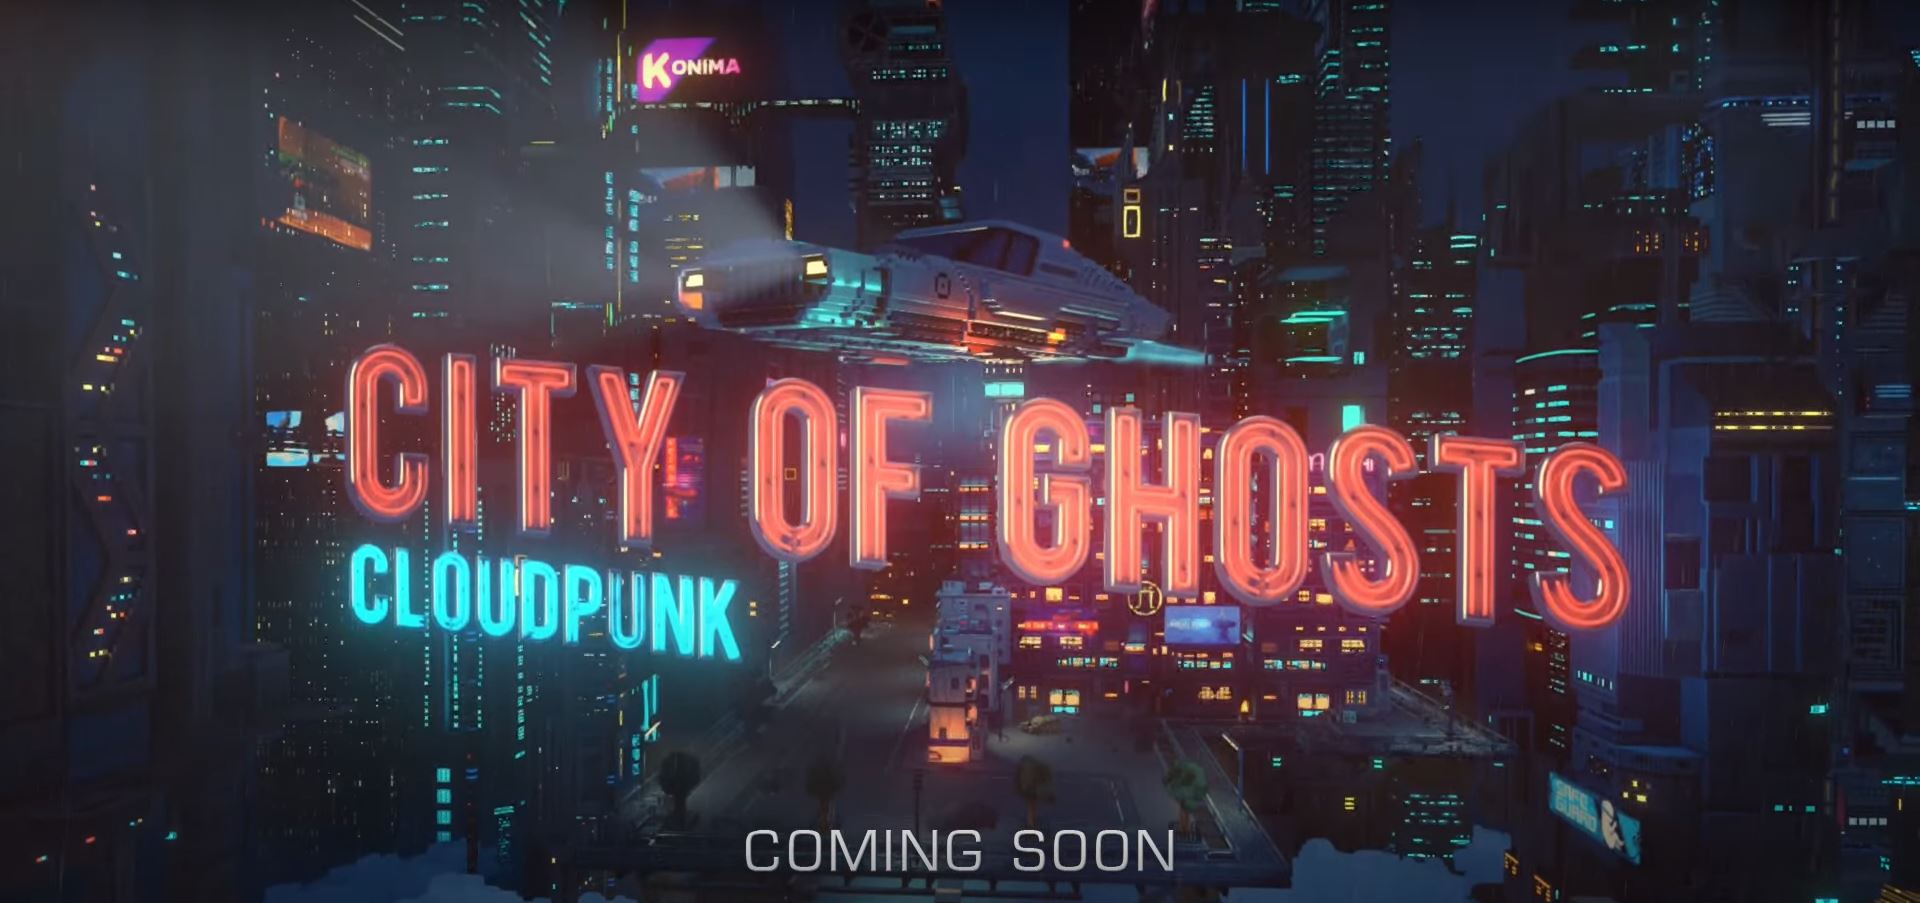 cloudpunk city of ghosts switch